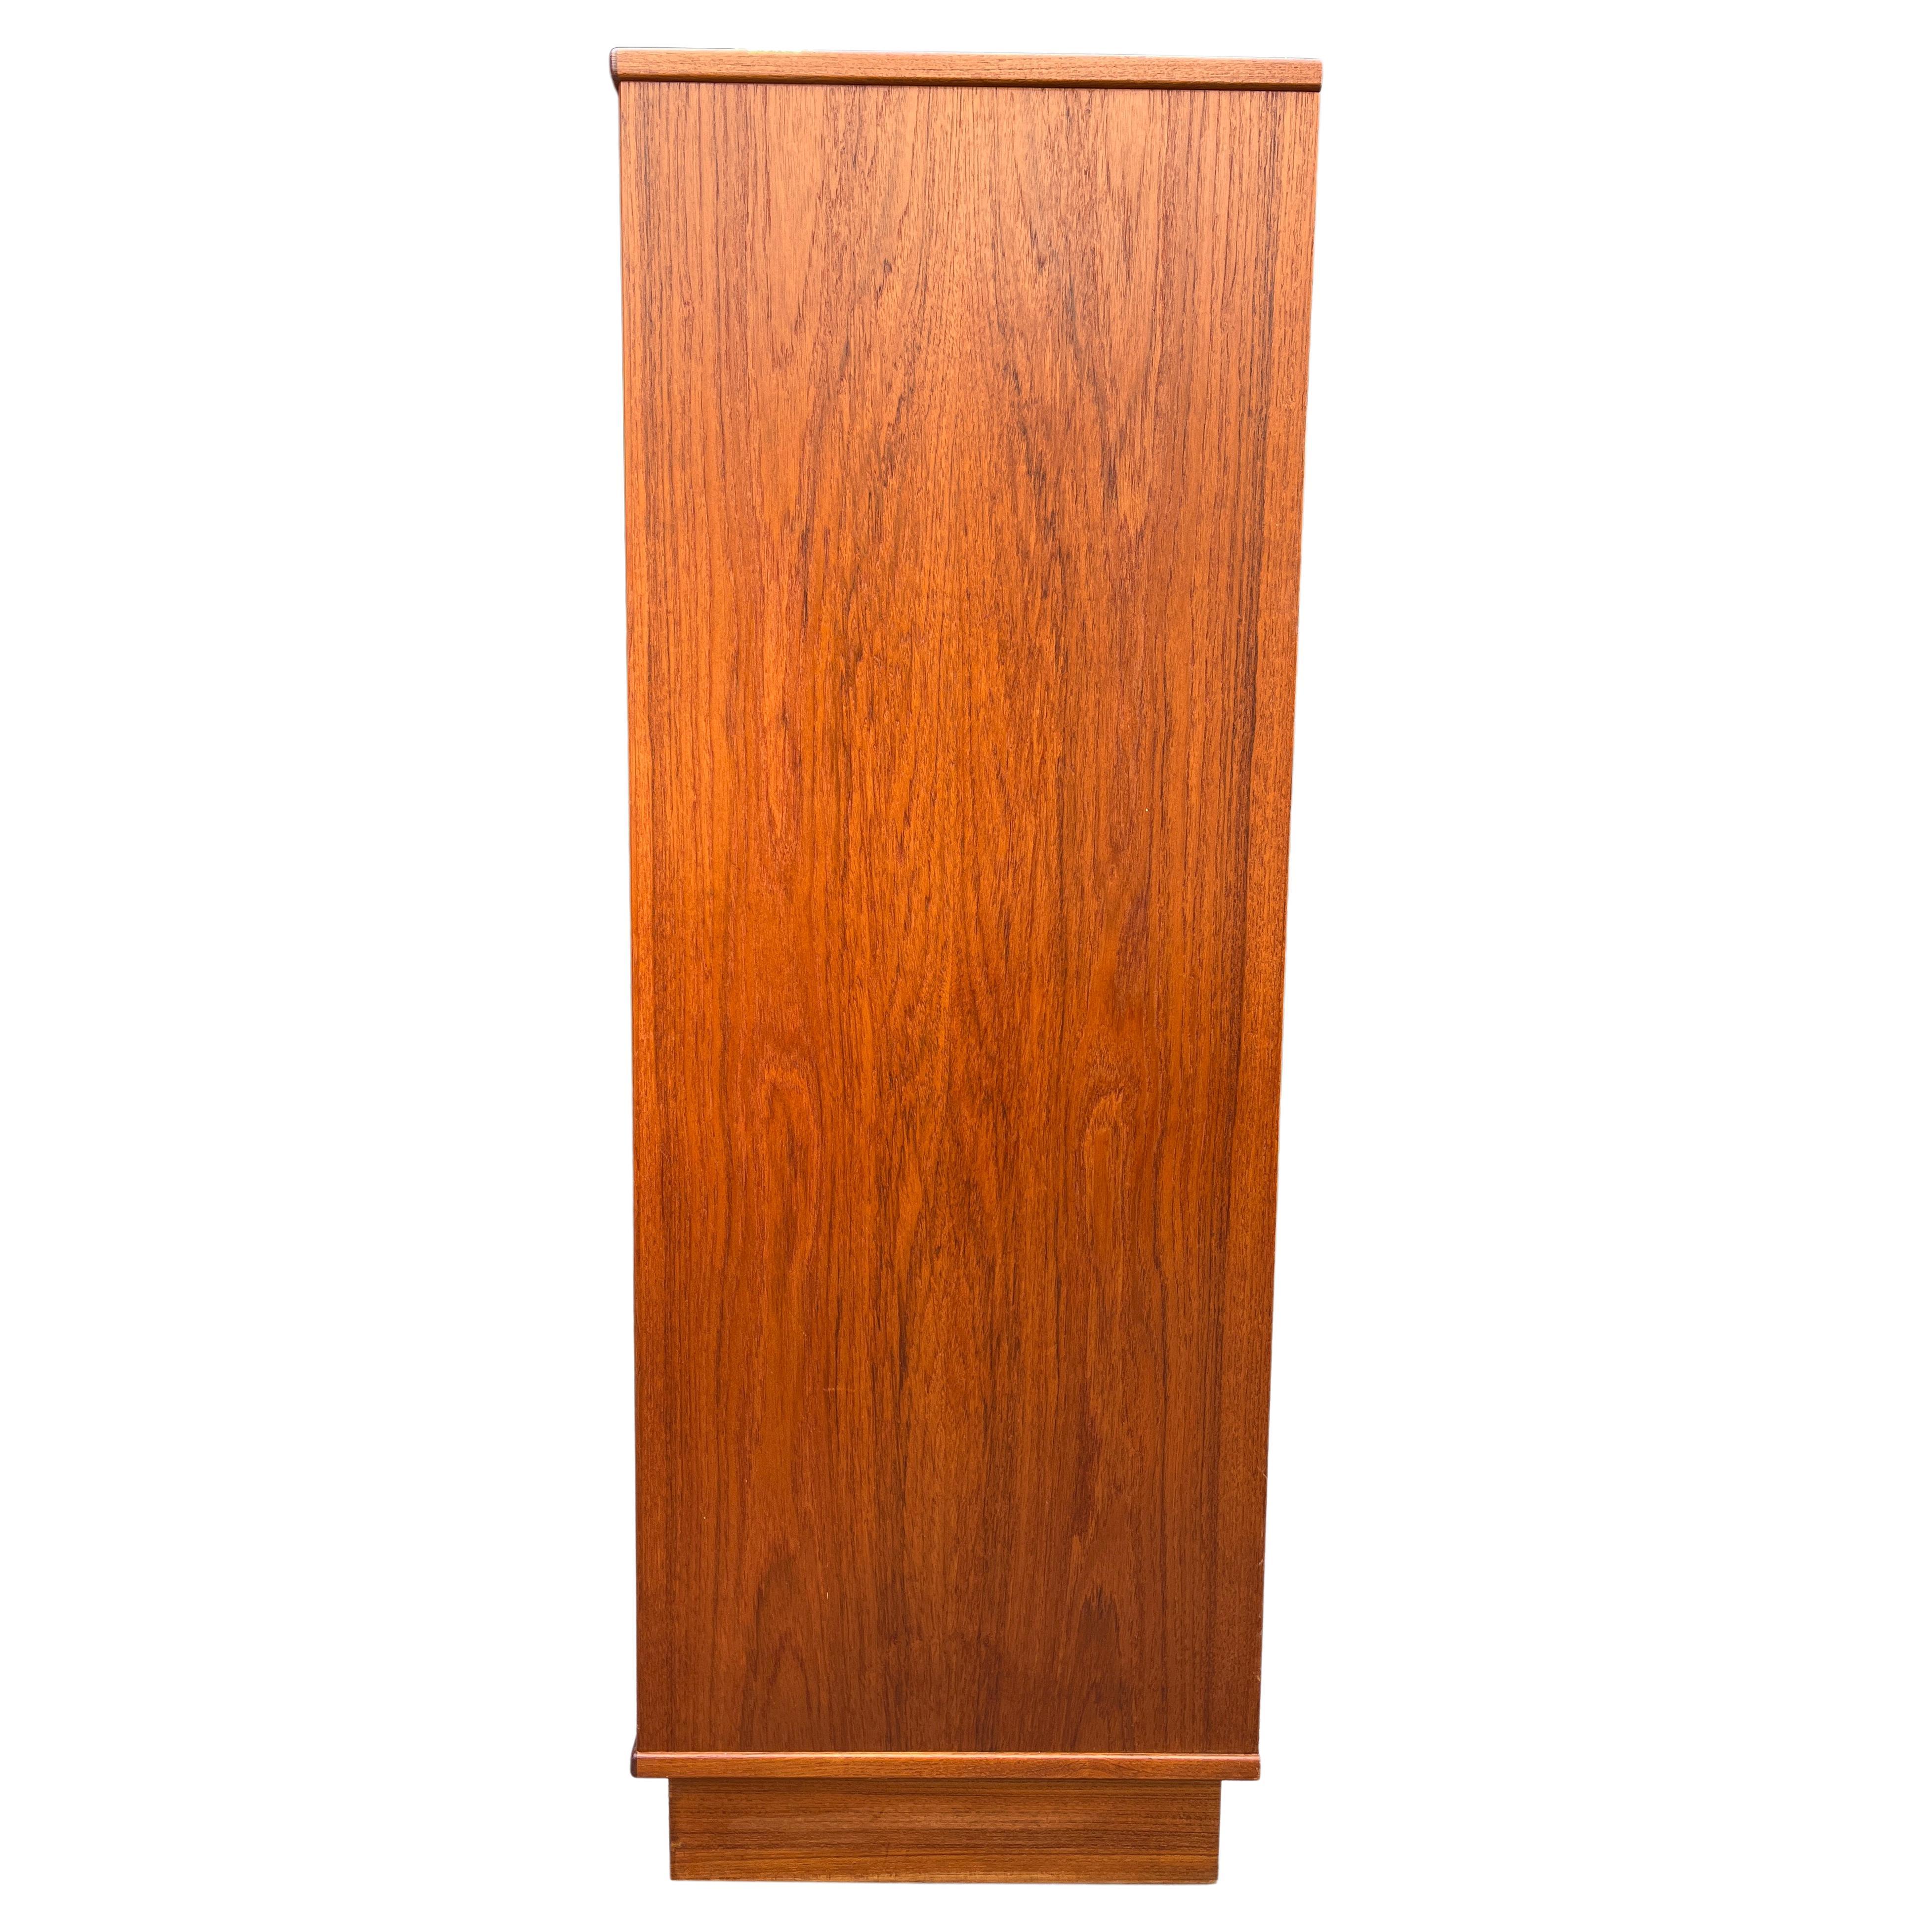 Danish Midcentury Tall Teak Chest of Drawers For Sale